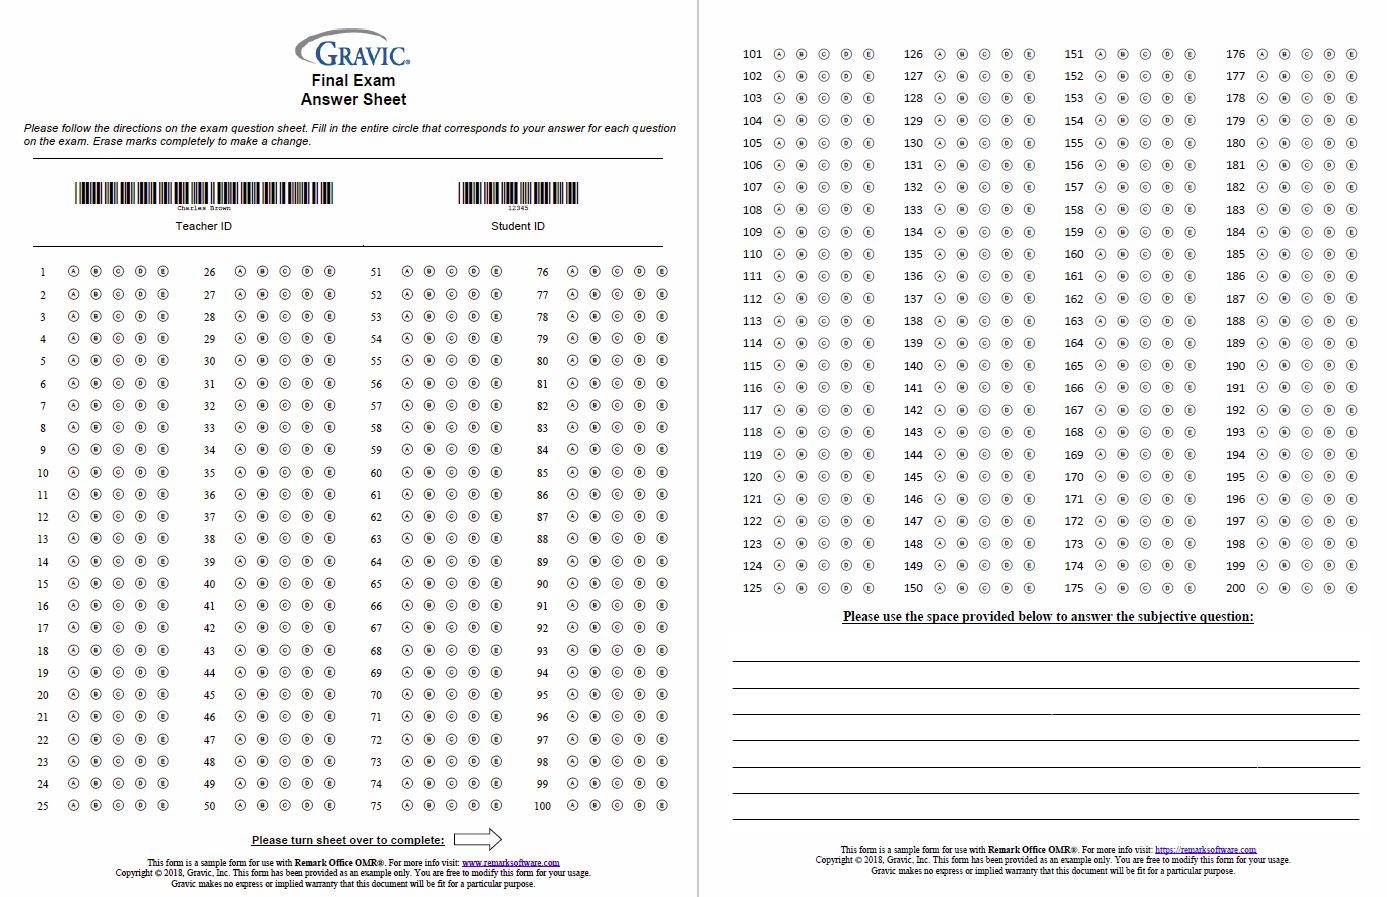 200 Question Test Answer Sheet With Subjective Question Remark Software - Free Printable Bubble Answer Sheets